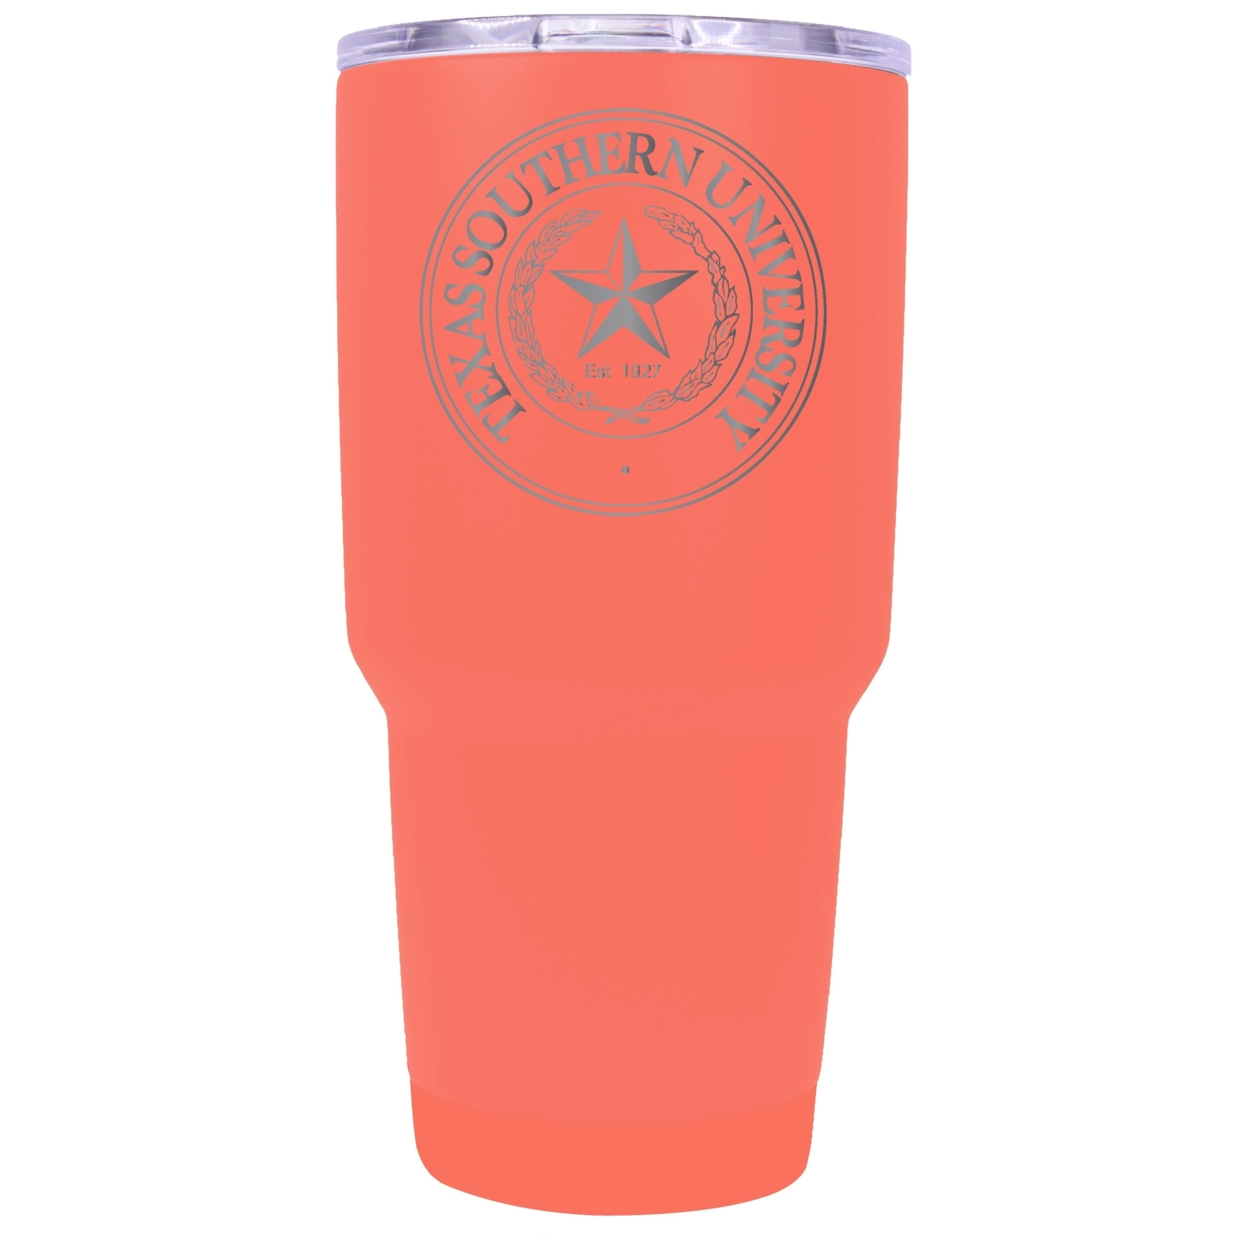 Texas Southern University 24 Oz Laser Engraved Stainless Steel Insulated Tumbler - Choose Your Color. - Red